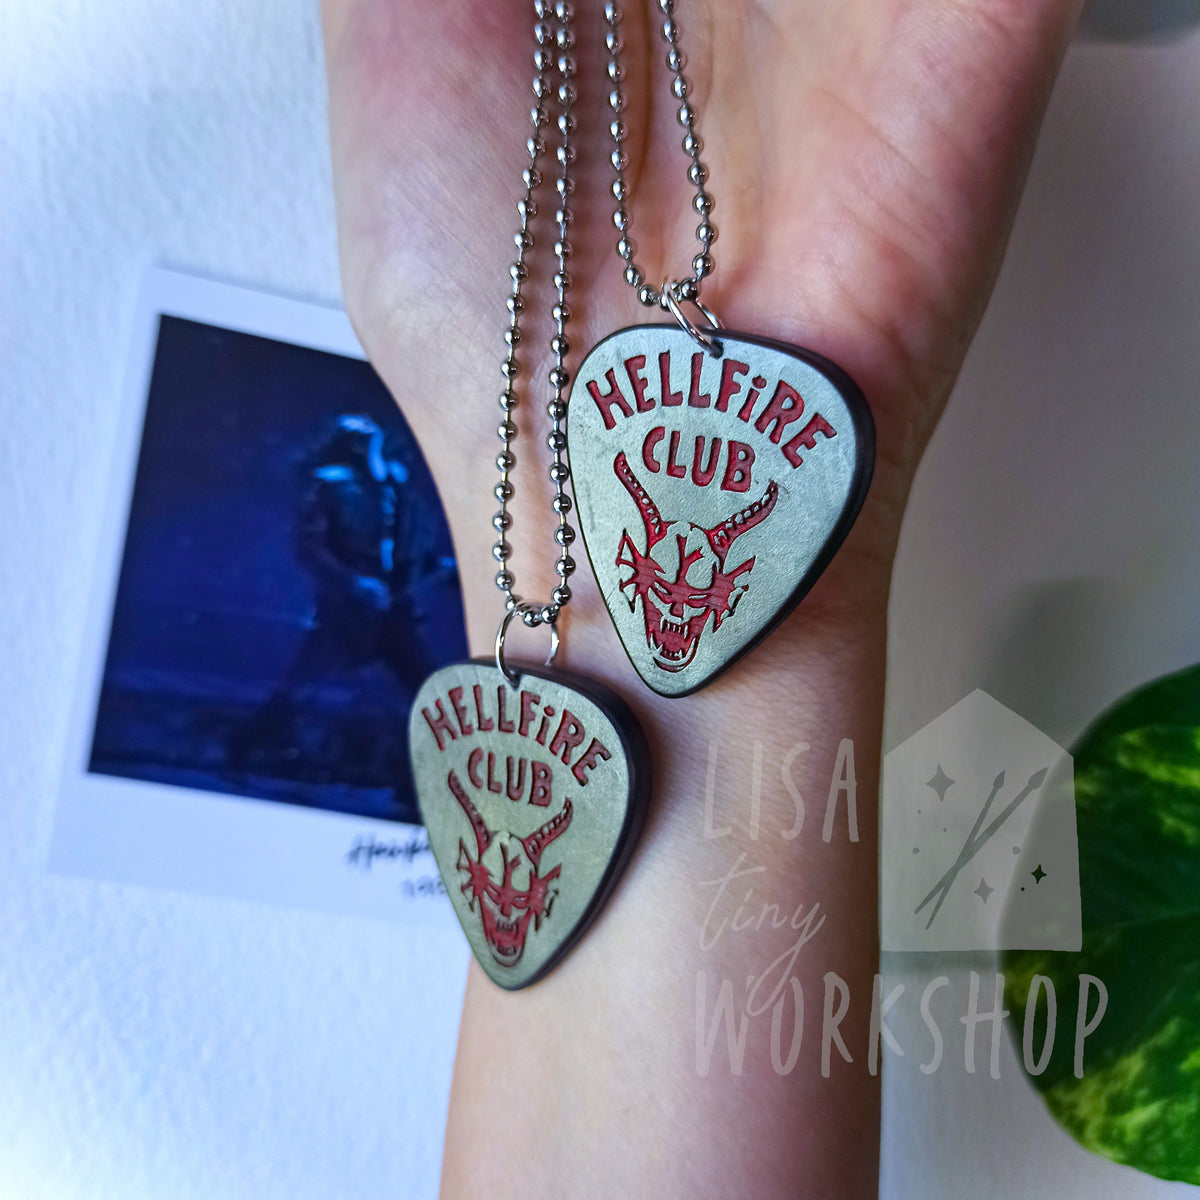 Free Shipping Stranger Things Hellfire Club Unisex Necklace Eddie Munson  Guitar Pick Pendant brooch Jewelry for Tv Fans Gift - AliExpress